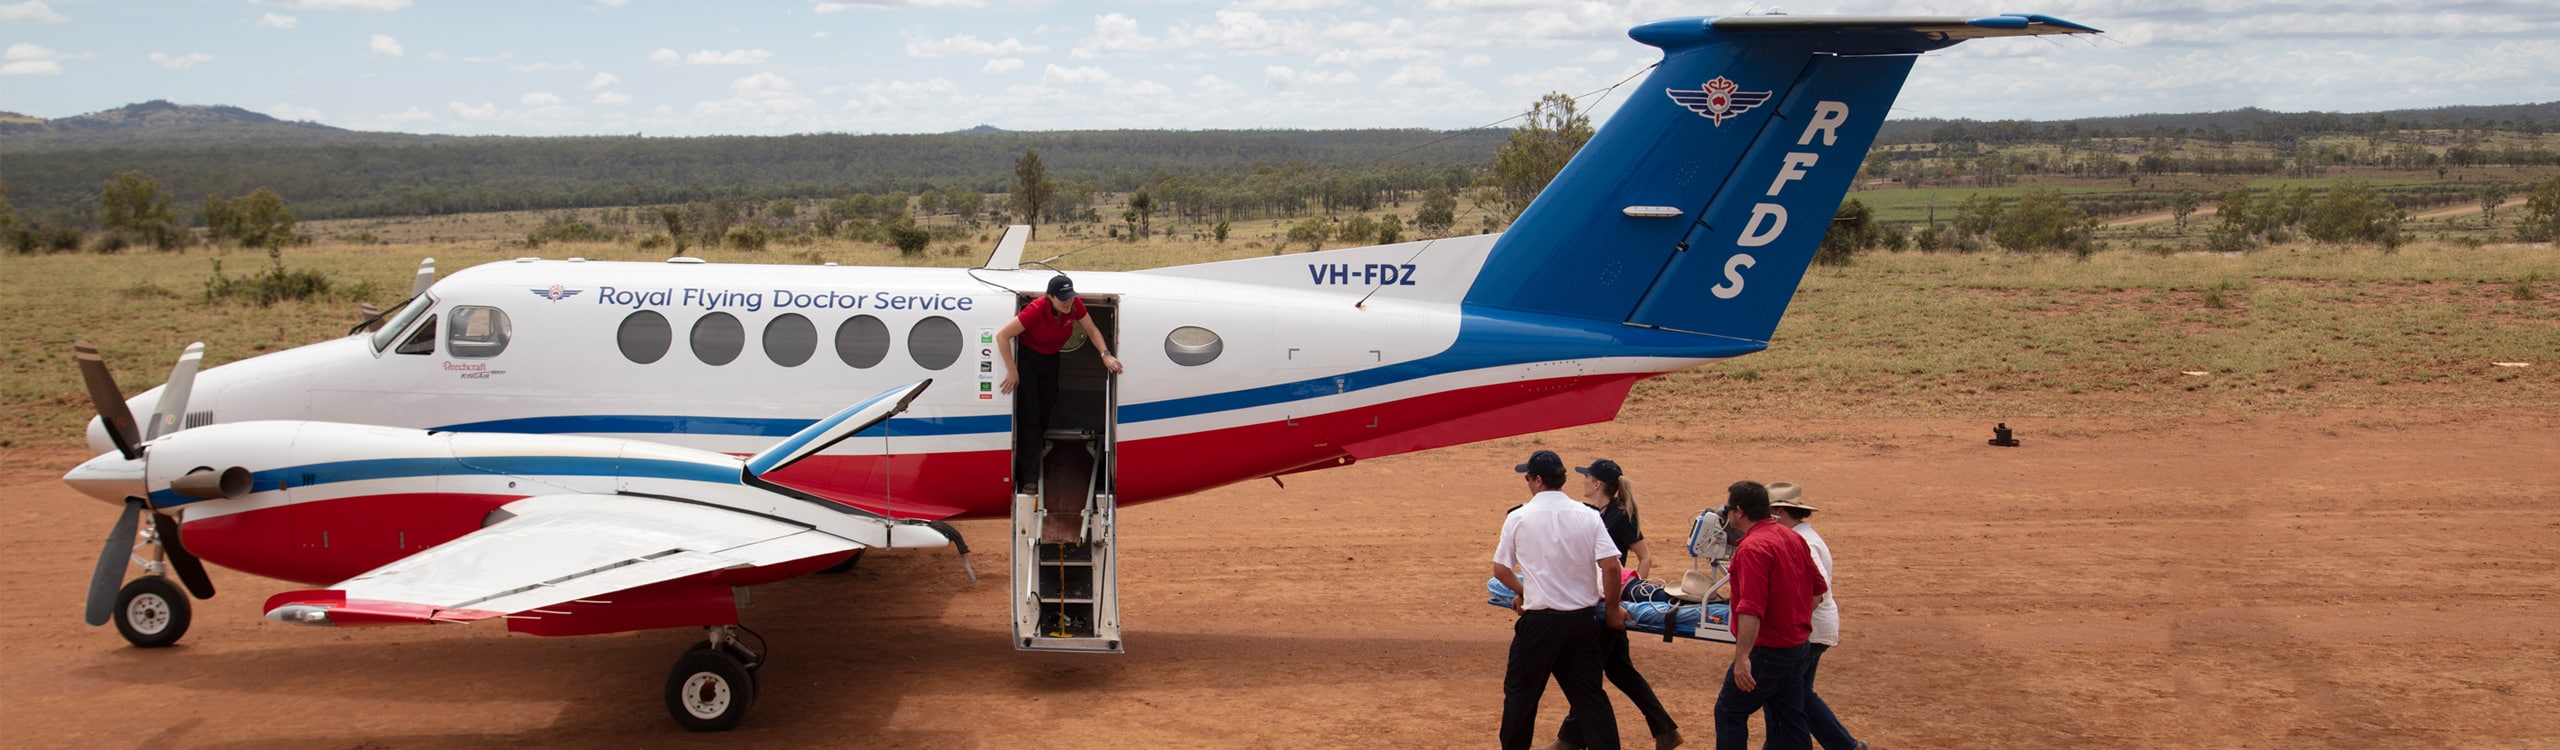 RFDS Qld Aeromedical Services in Queensland